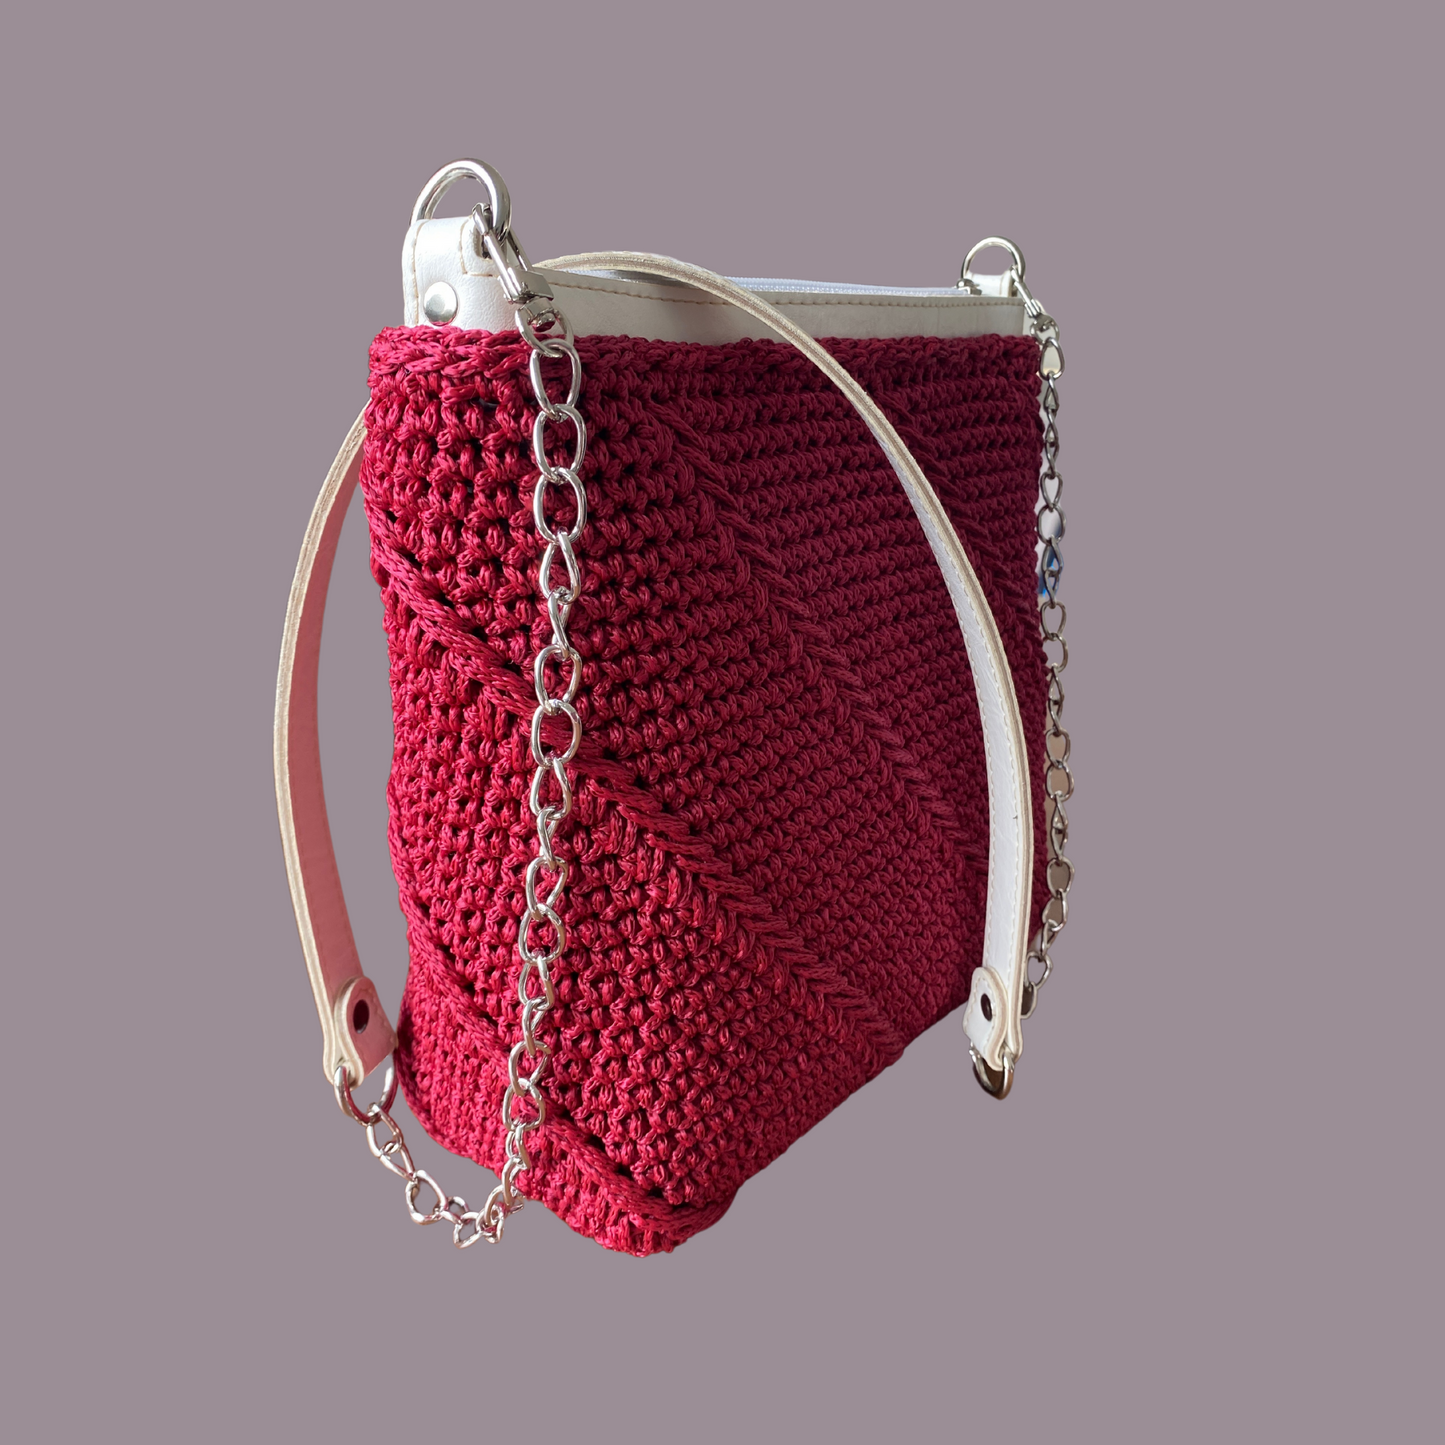 AMELIA - Burgundy red cross-body for everyday use